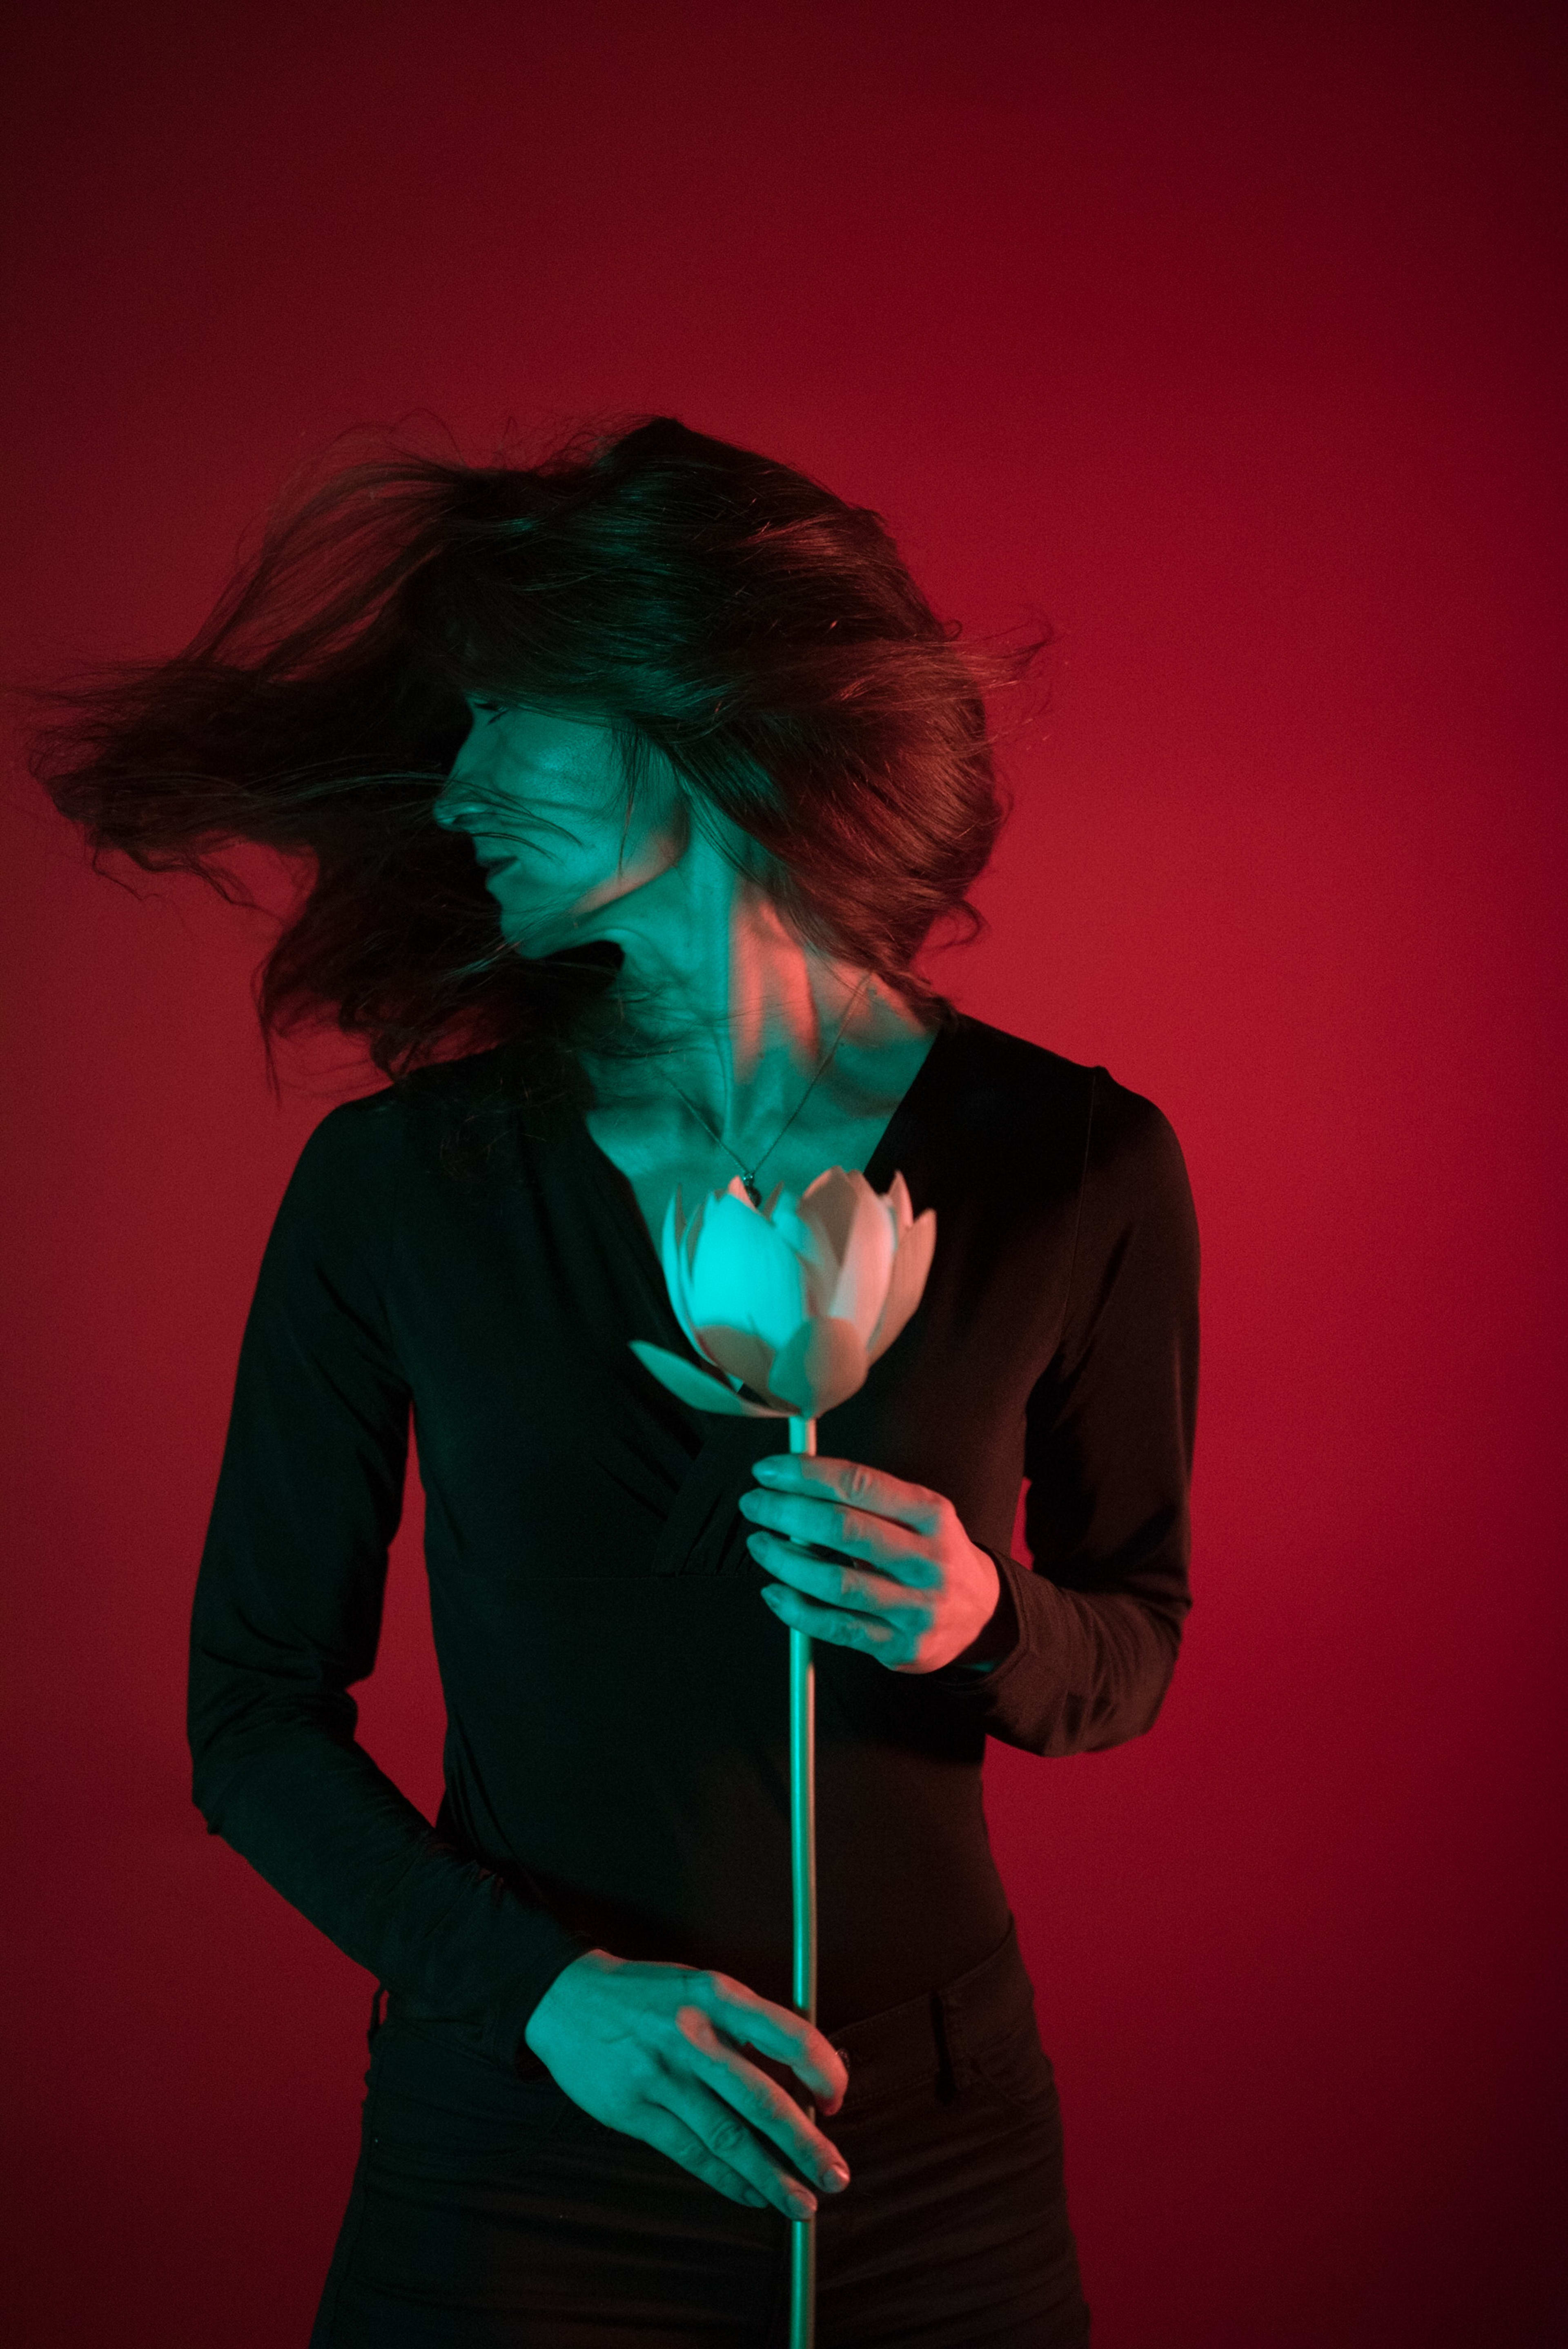 A woman with long dark hair holding a flower on a red background.